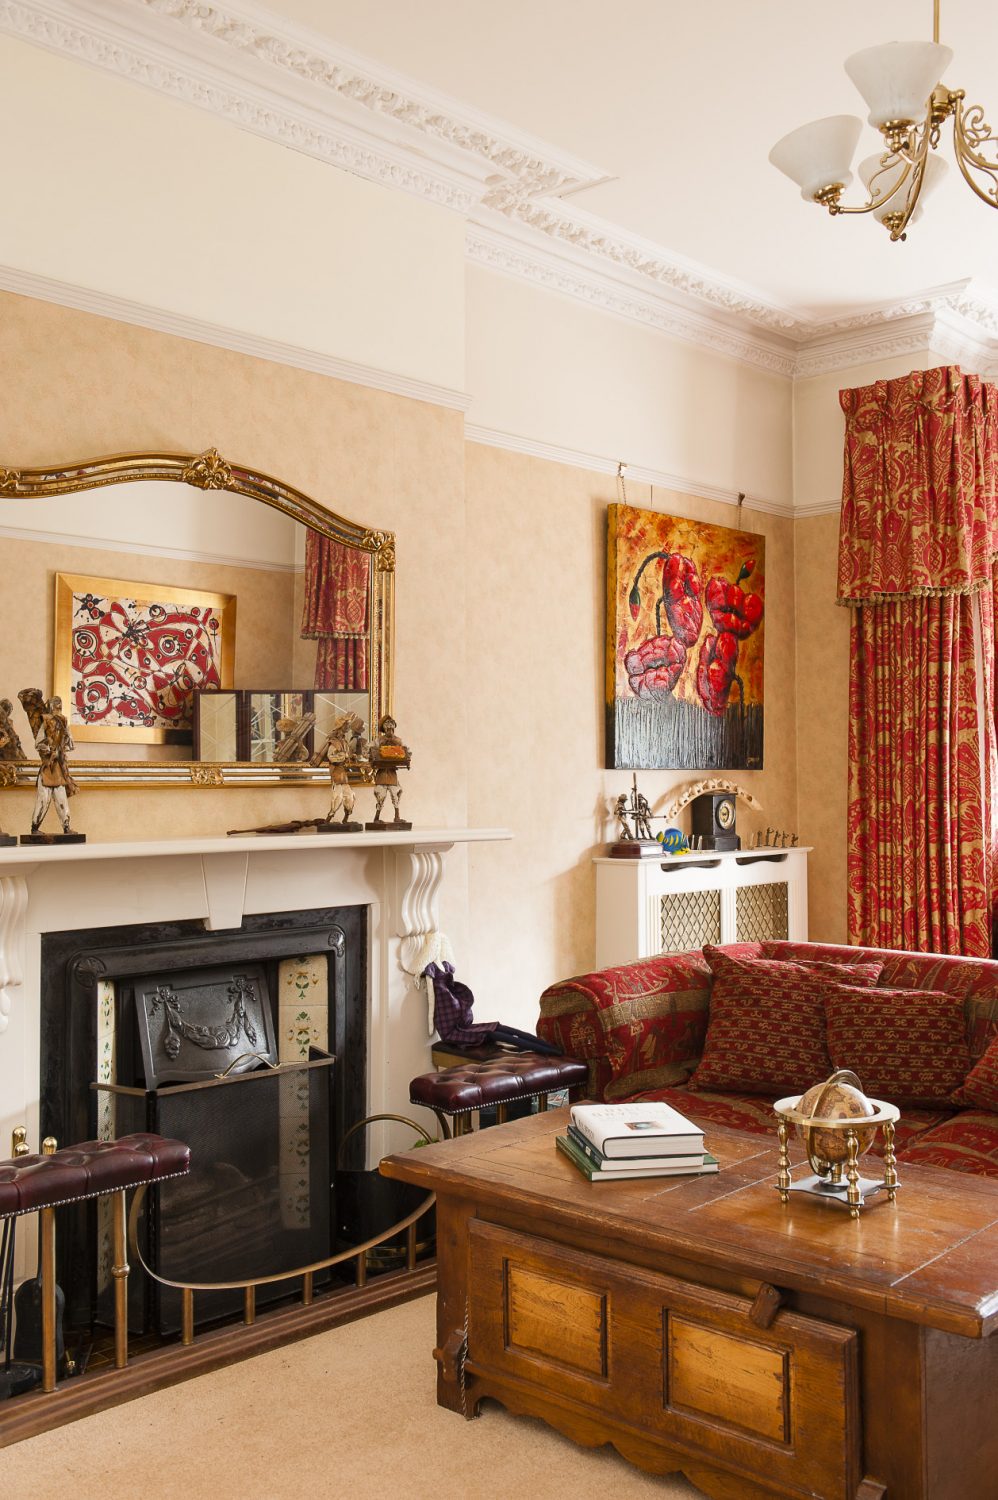 Sofas gather around the fire in the family drawing room